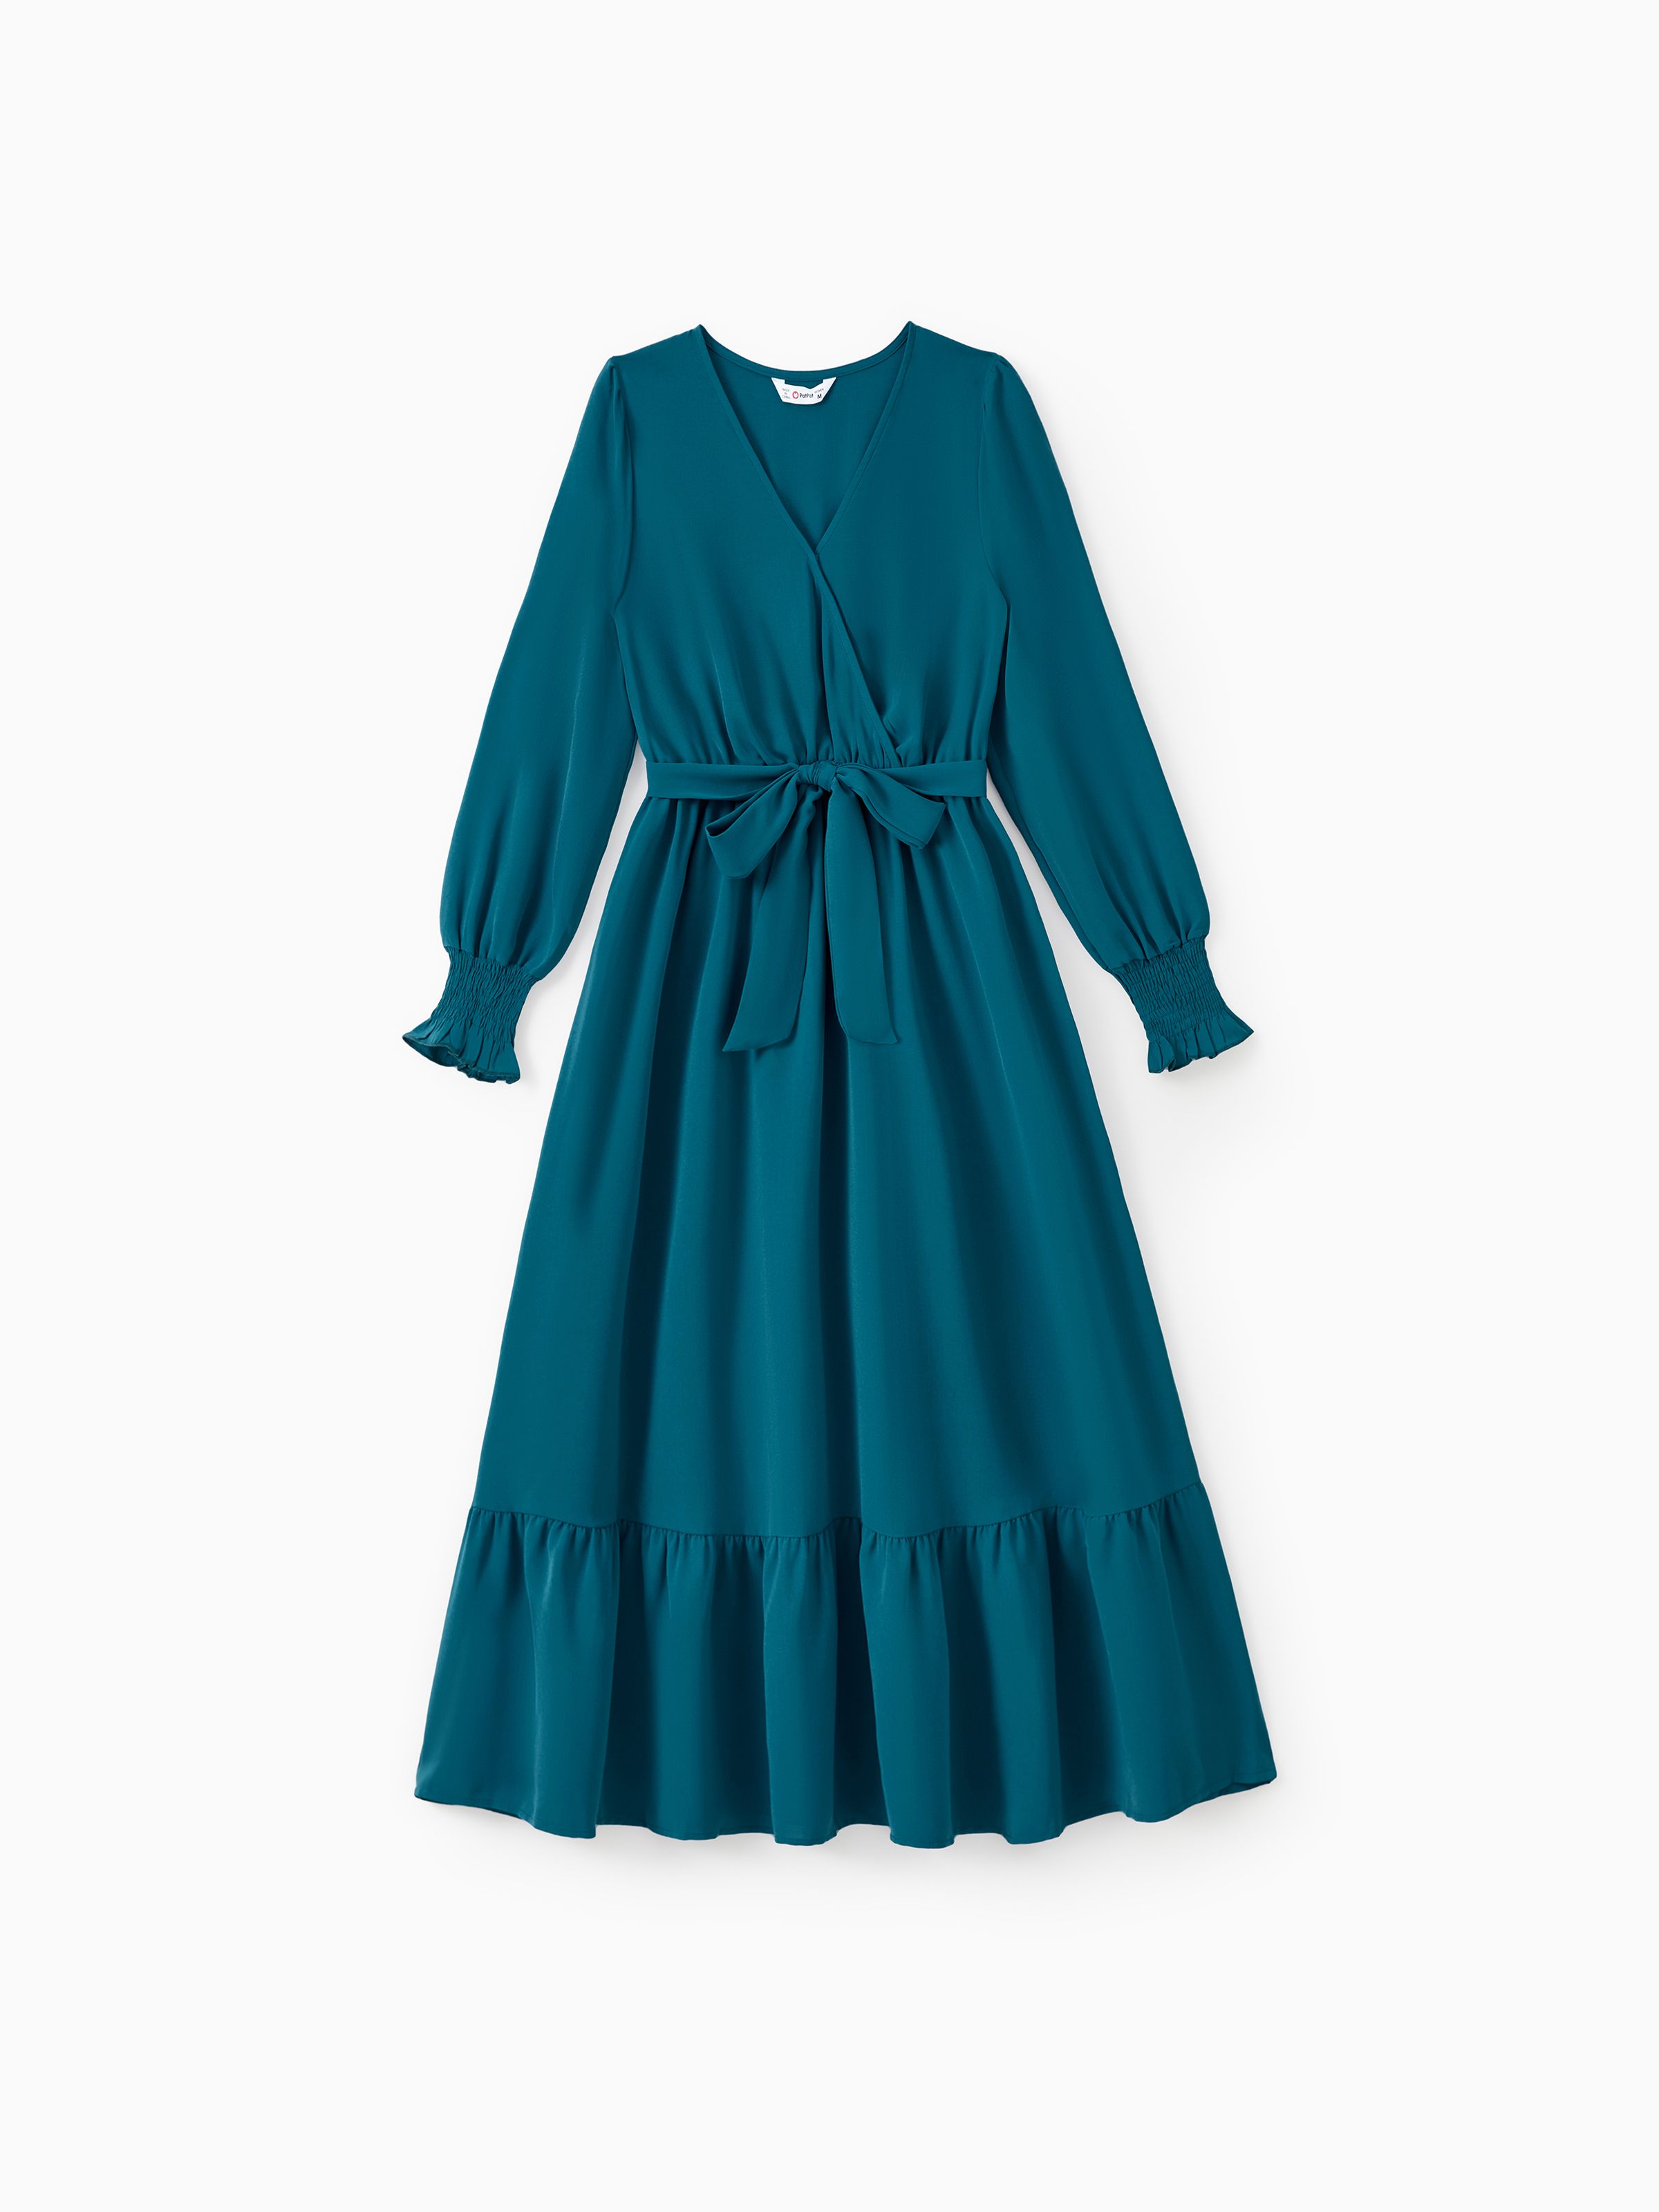 

Mommy and Me Ice Silk Crepe Fabric Blue-Green Long Sleeves Wrap Top Ruffle Hem Belted Dress with Hidden Snap